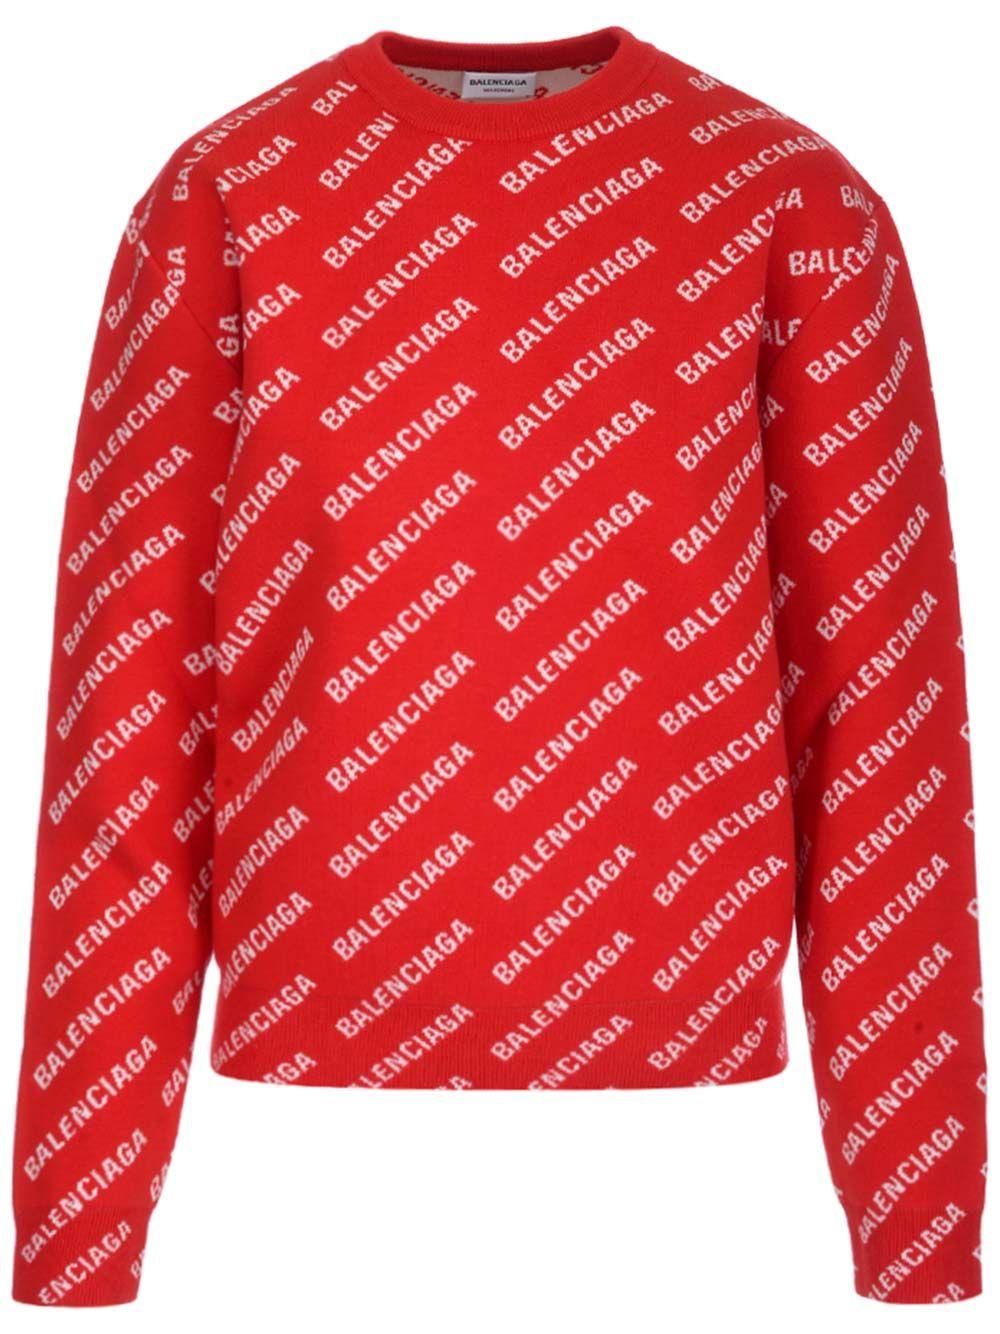 Balenciaga All-over Logo Crew-neck Sweater in Red | Lyst